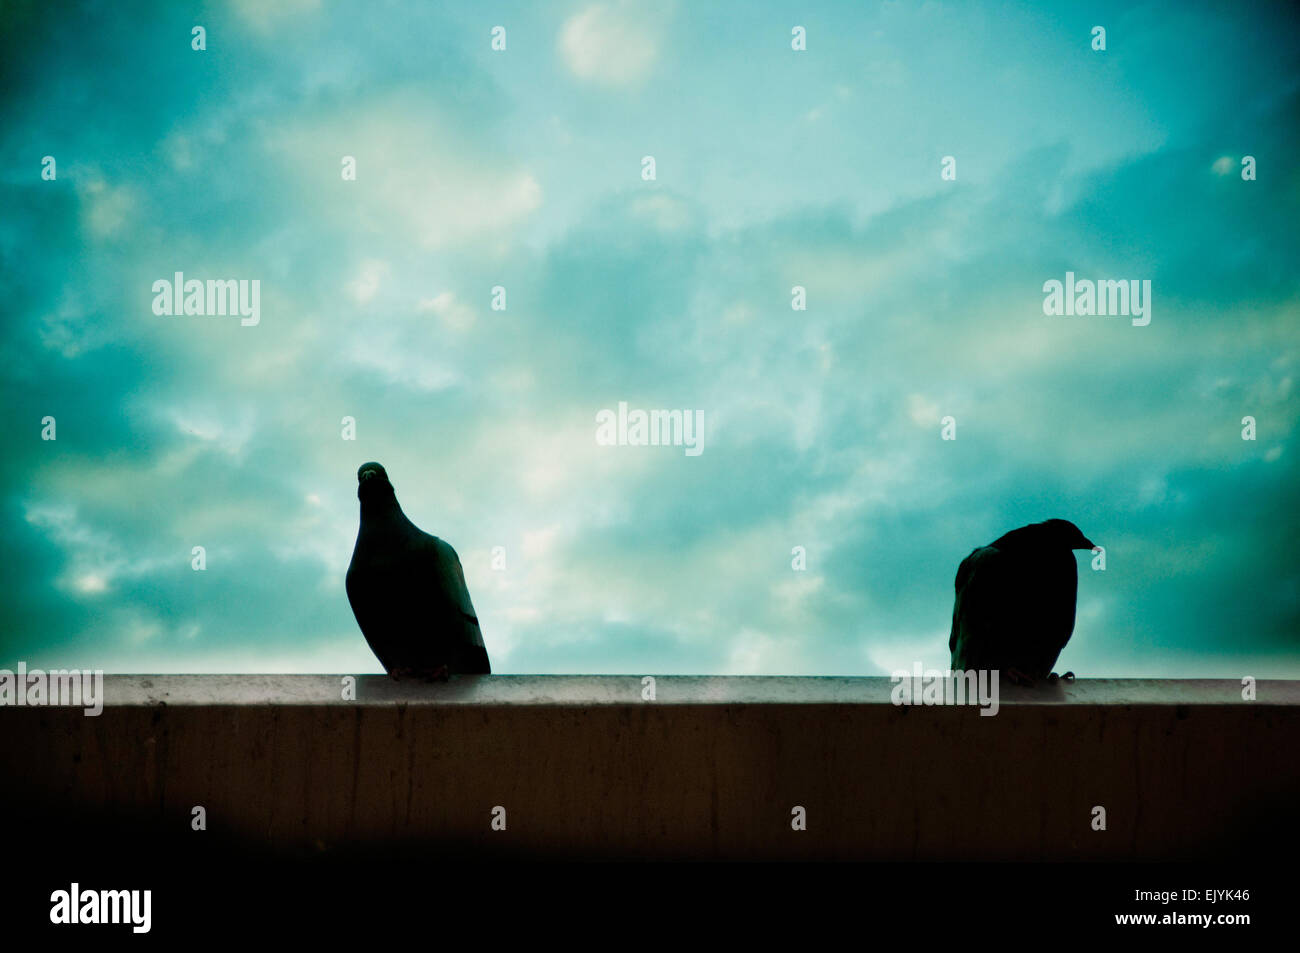 two pigeons silhouette Stock Photo